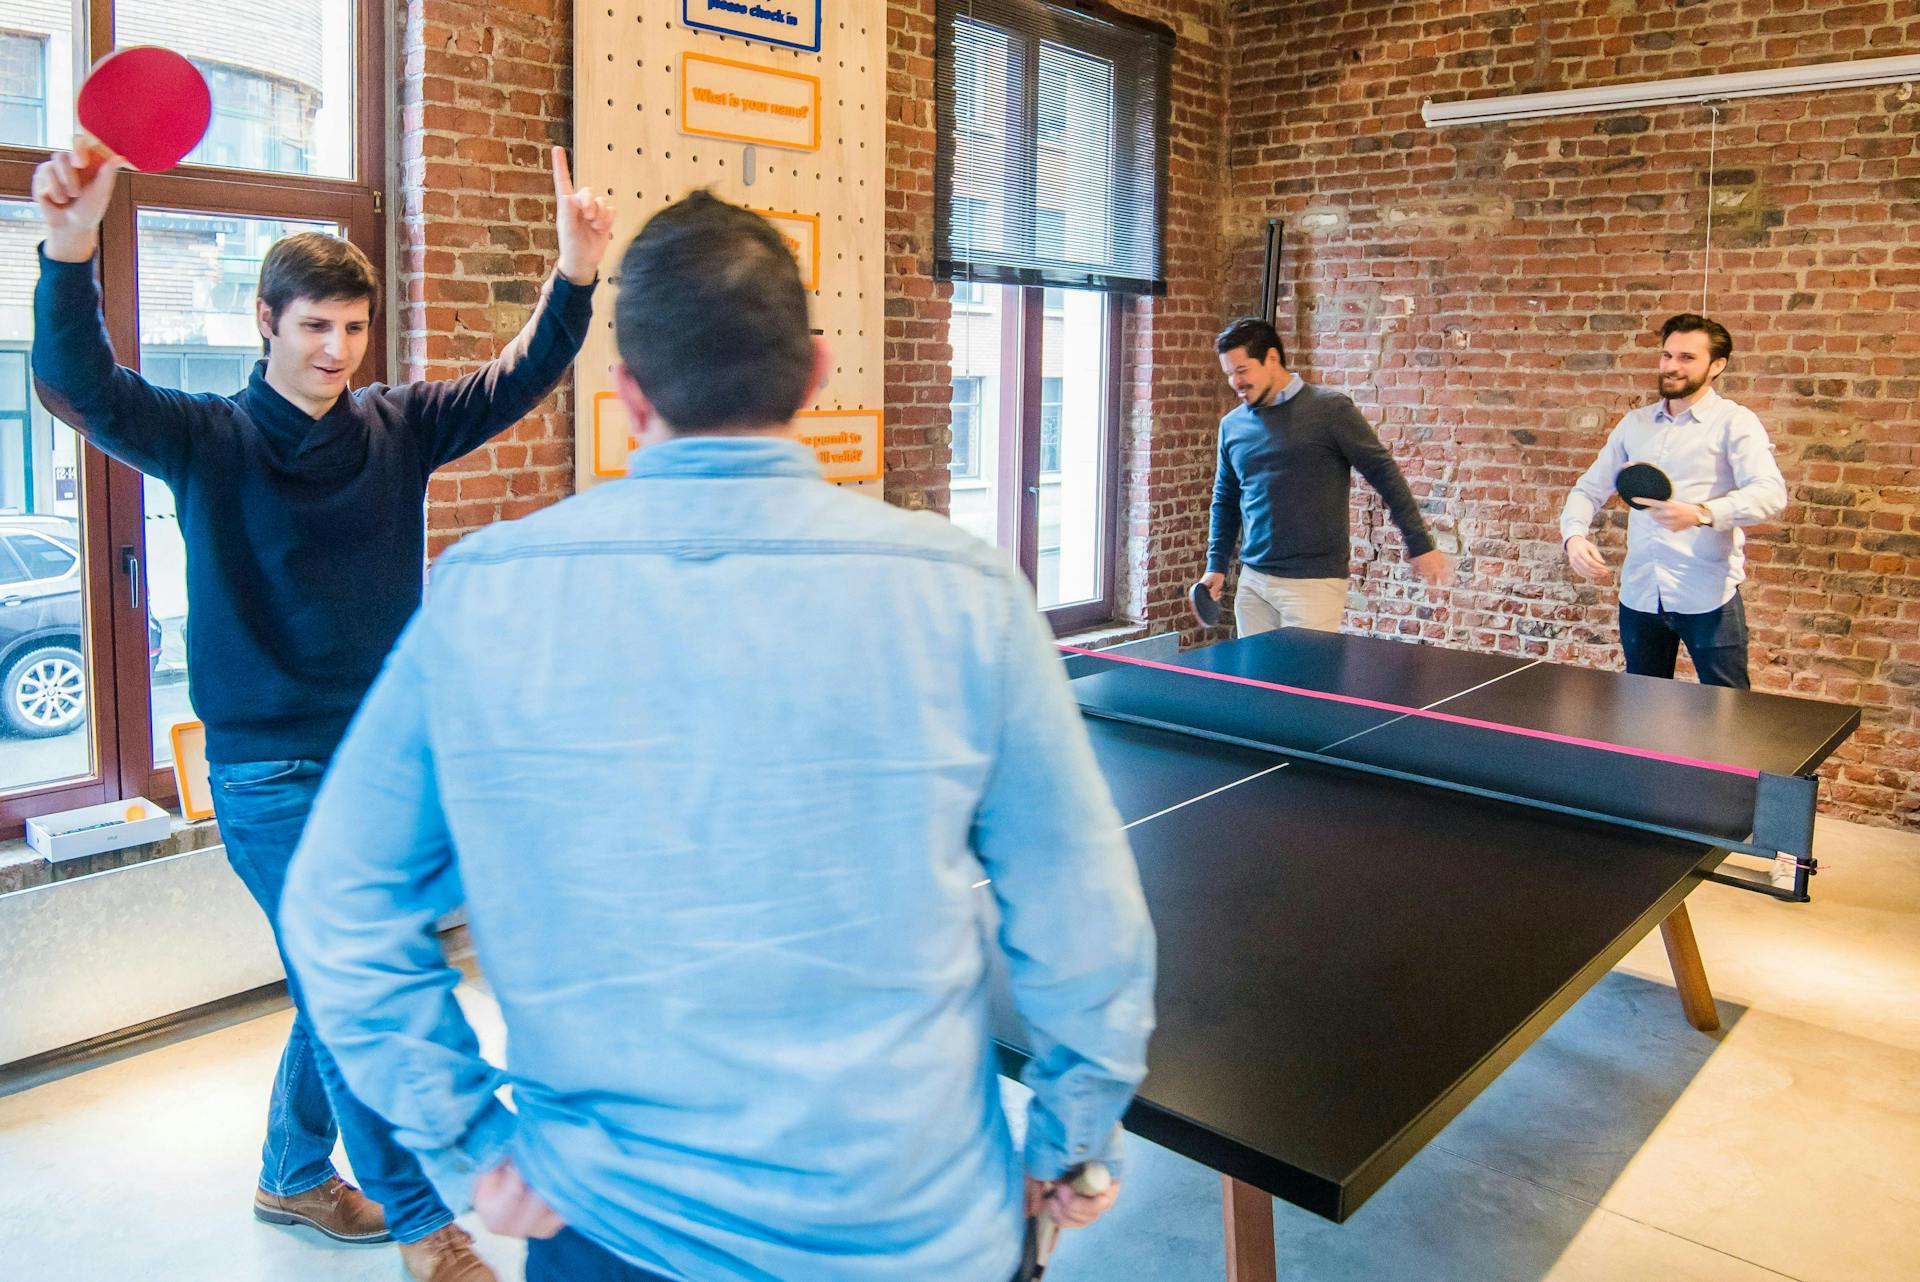 A group of four men playing ping pong in an office during a break. This is the type of in-office experience that can positively contribute to the employee brand.